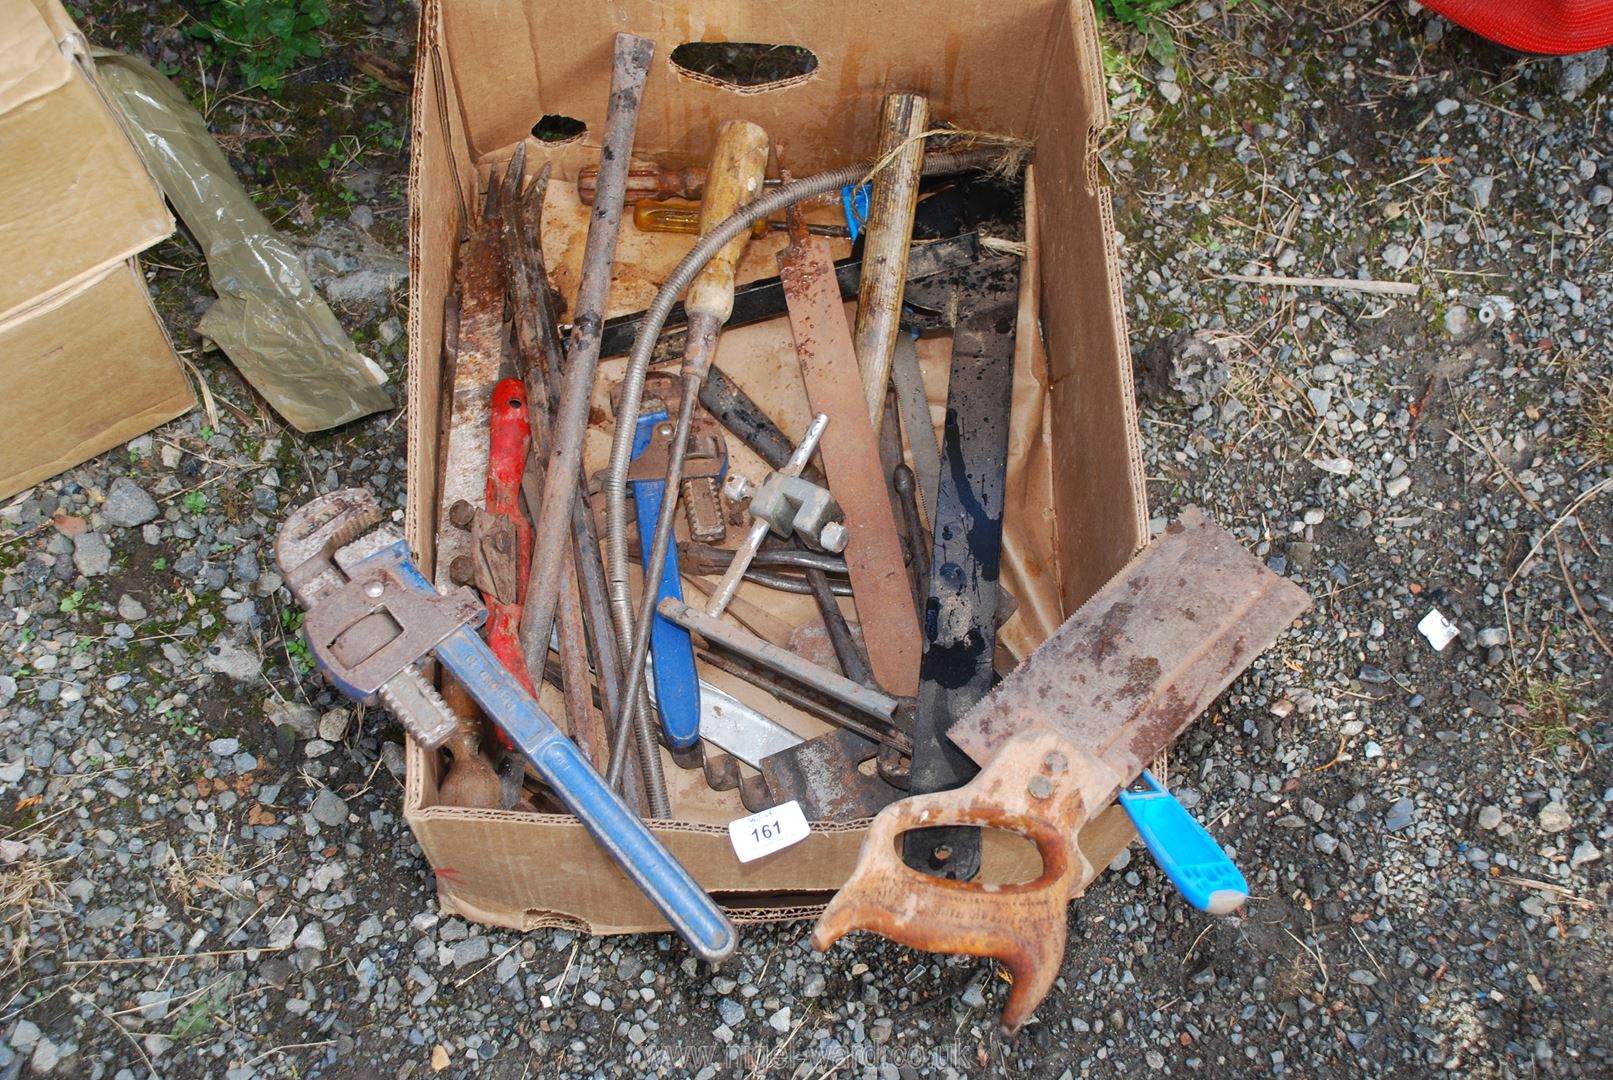 A box of nail bars, Stilsons, saw, set square and various other tools.